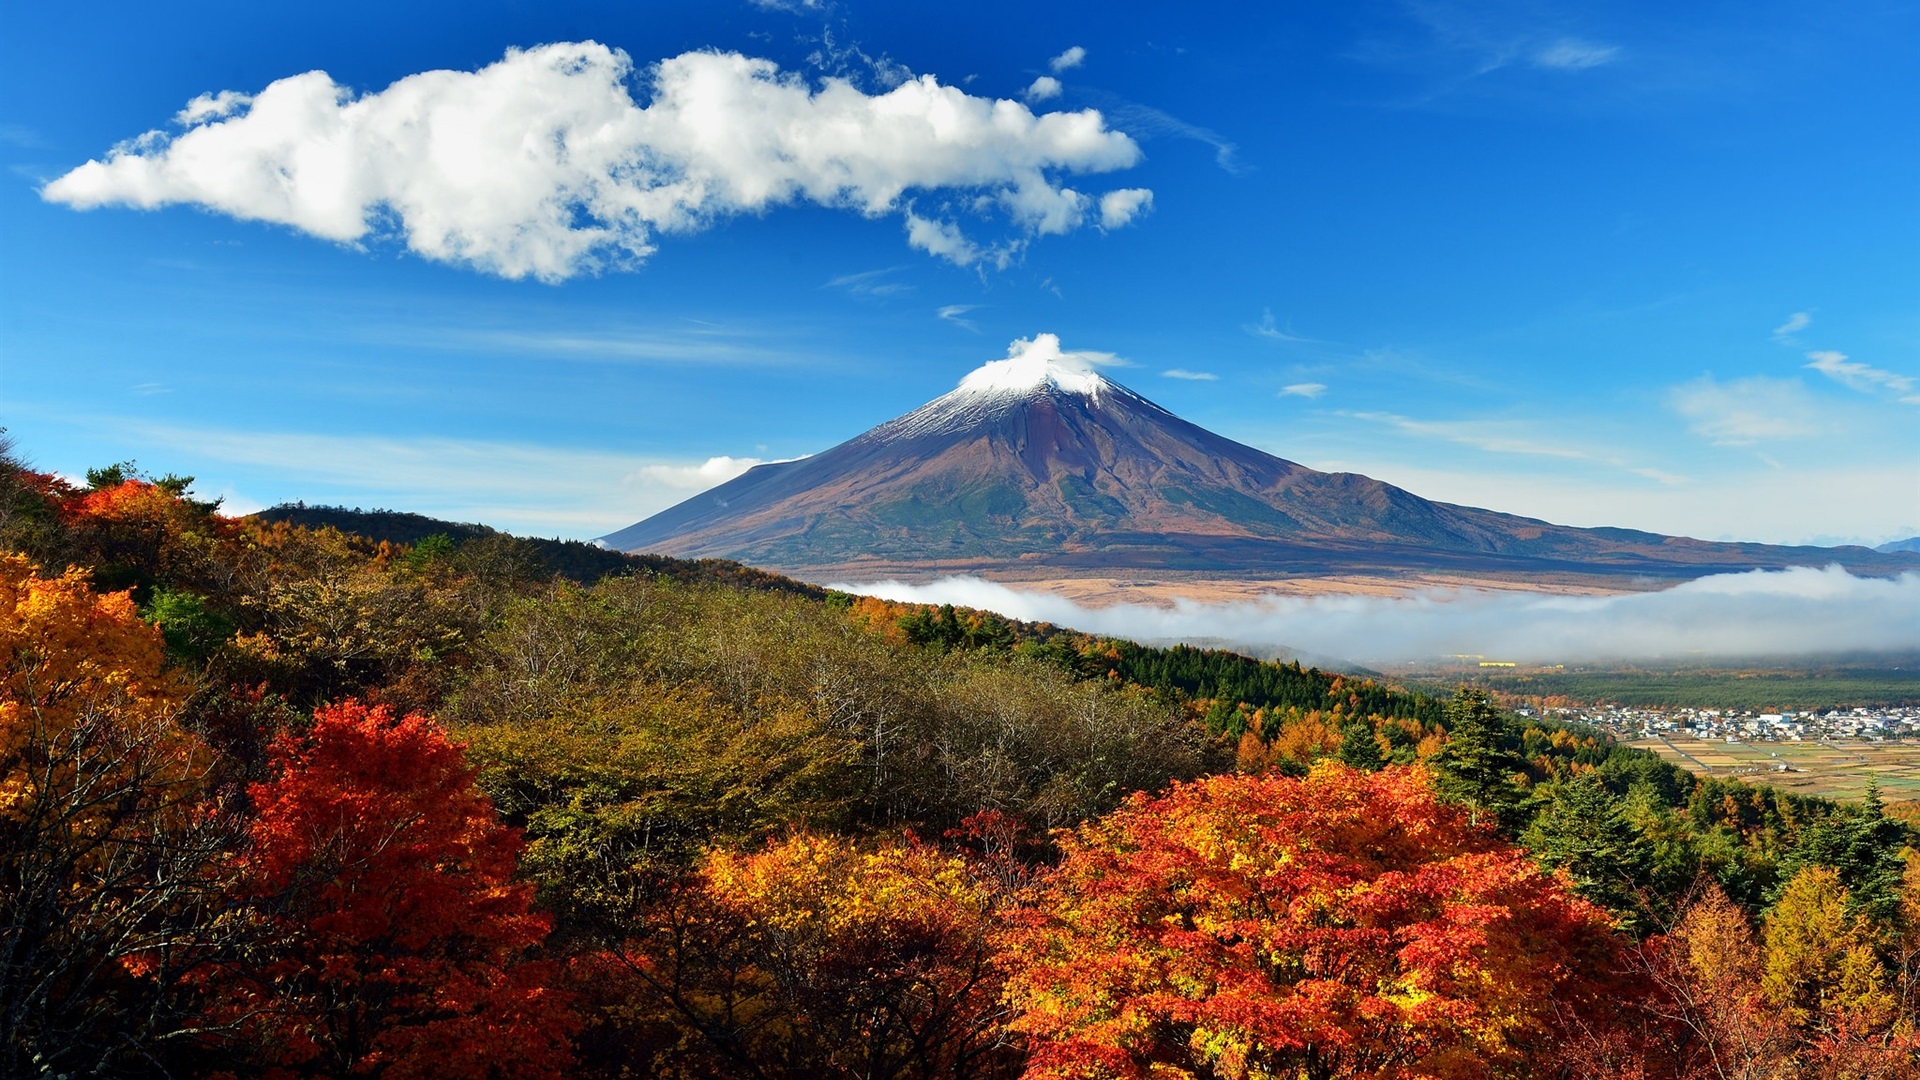 General 1920x1080 Japan Mount Fuji sky blue clouds nature landscape mountains trees Asia fall volcano